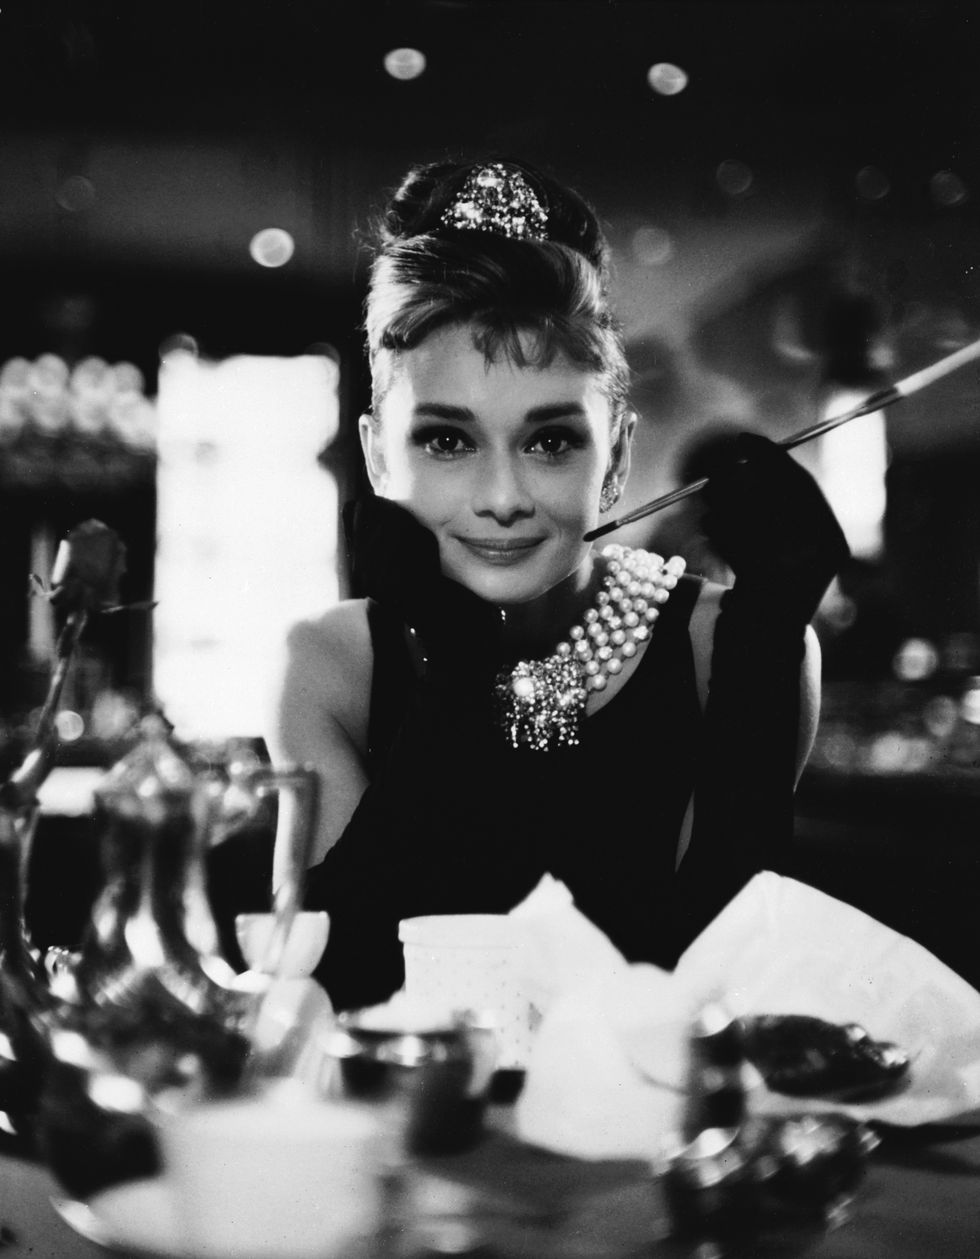 A Breakfast At Tiffany's guide to New York